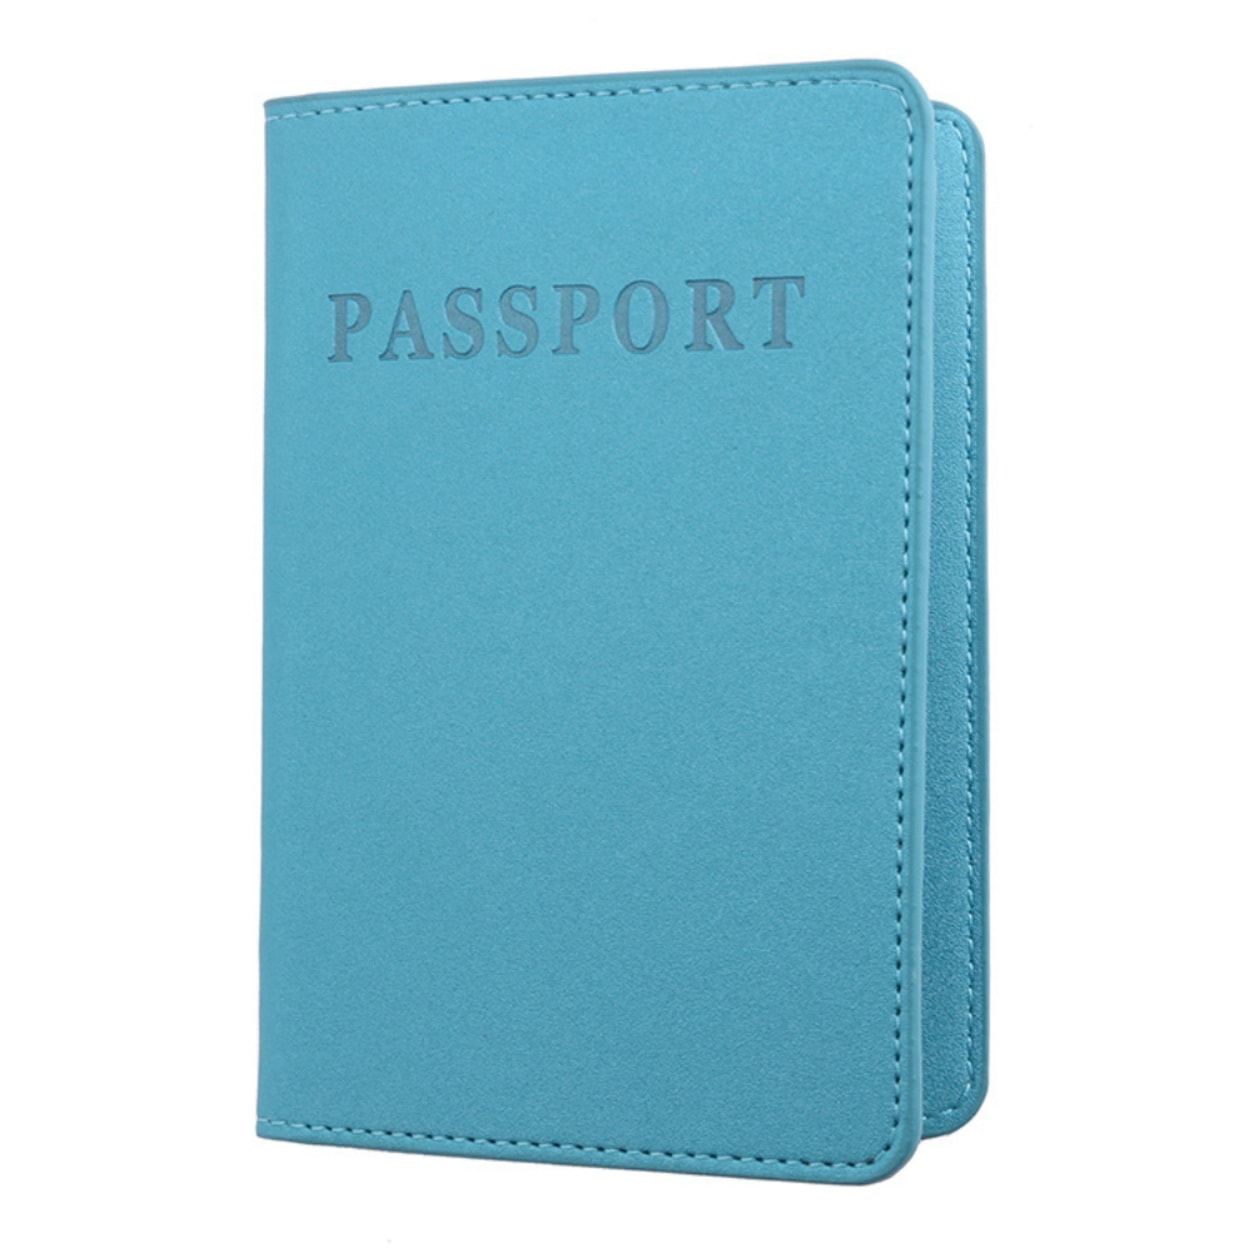 Solid Color Faux Leather Travel Passport Holder Cover Id Card Ticket Pouch Bag